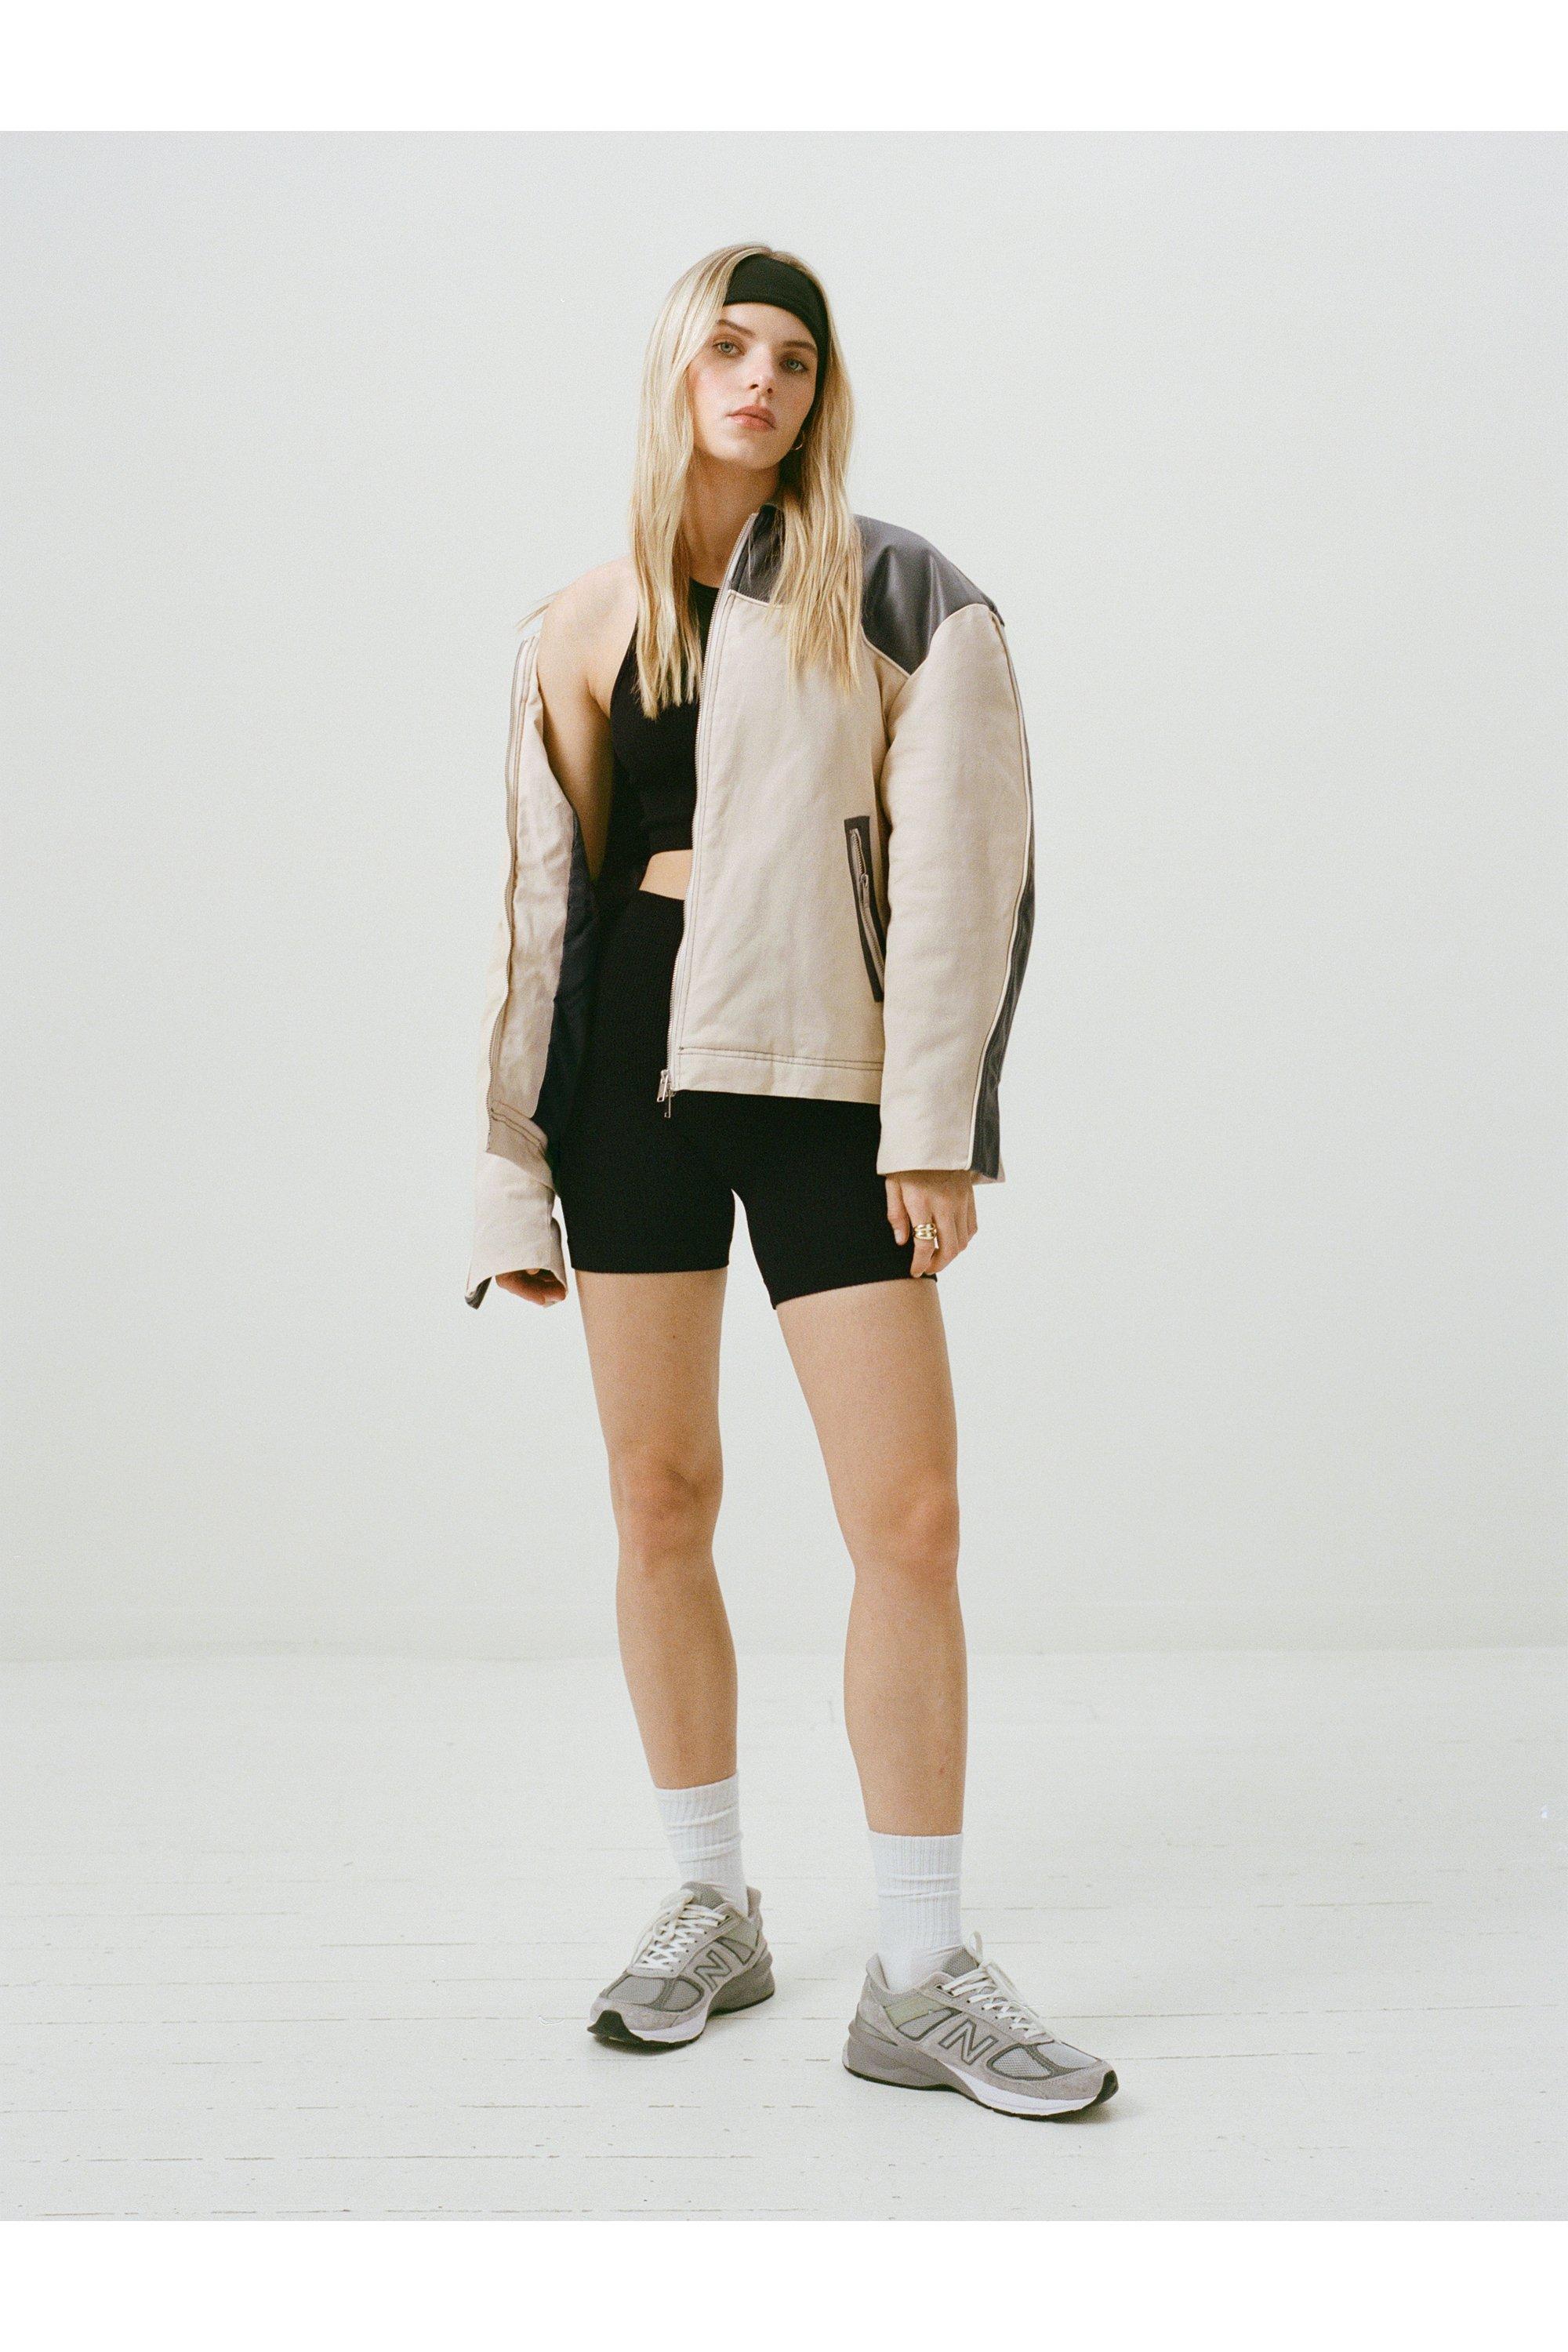 Twill & Faux Leather Color Block Trucker Jacket | Nasty Gal